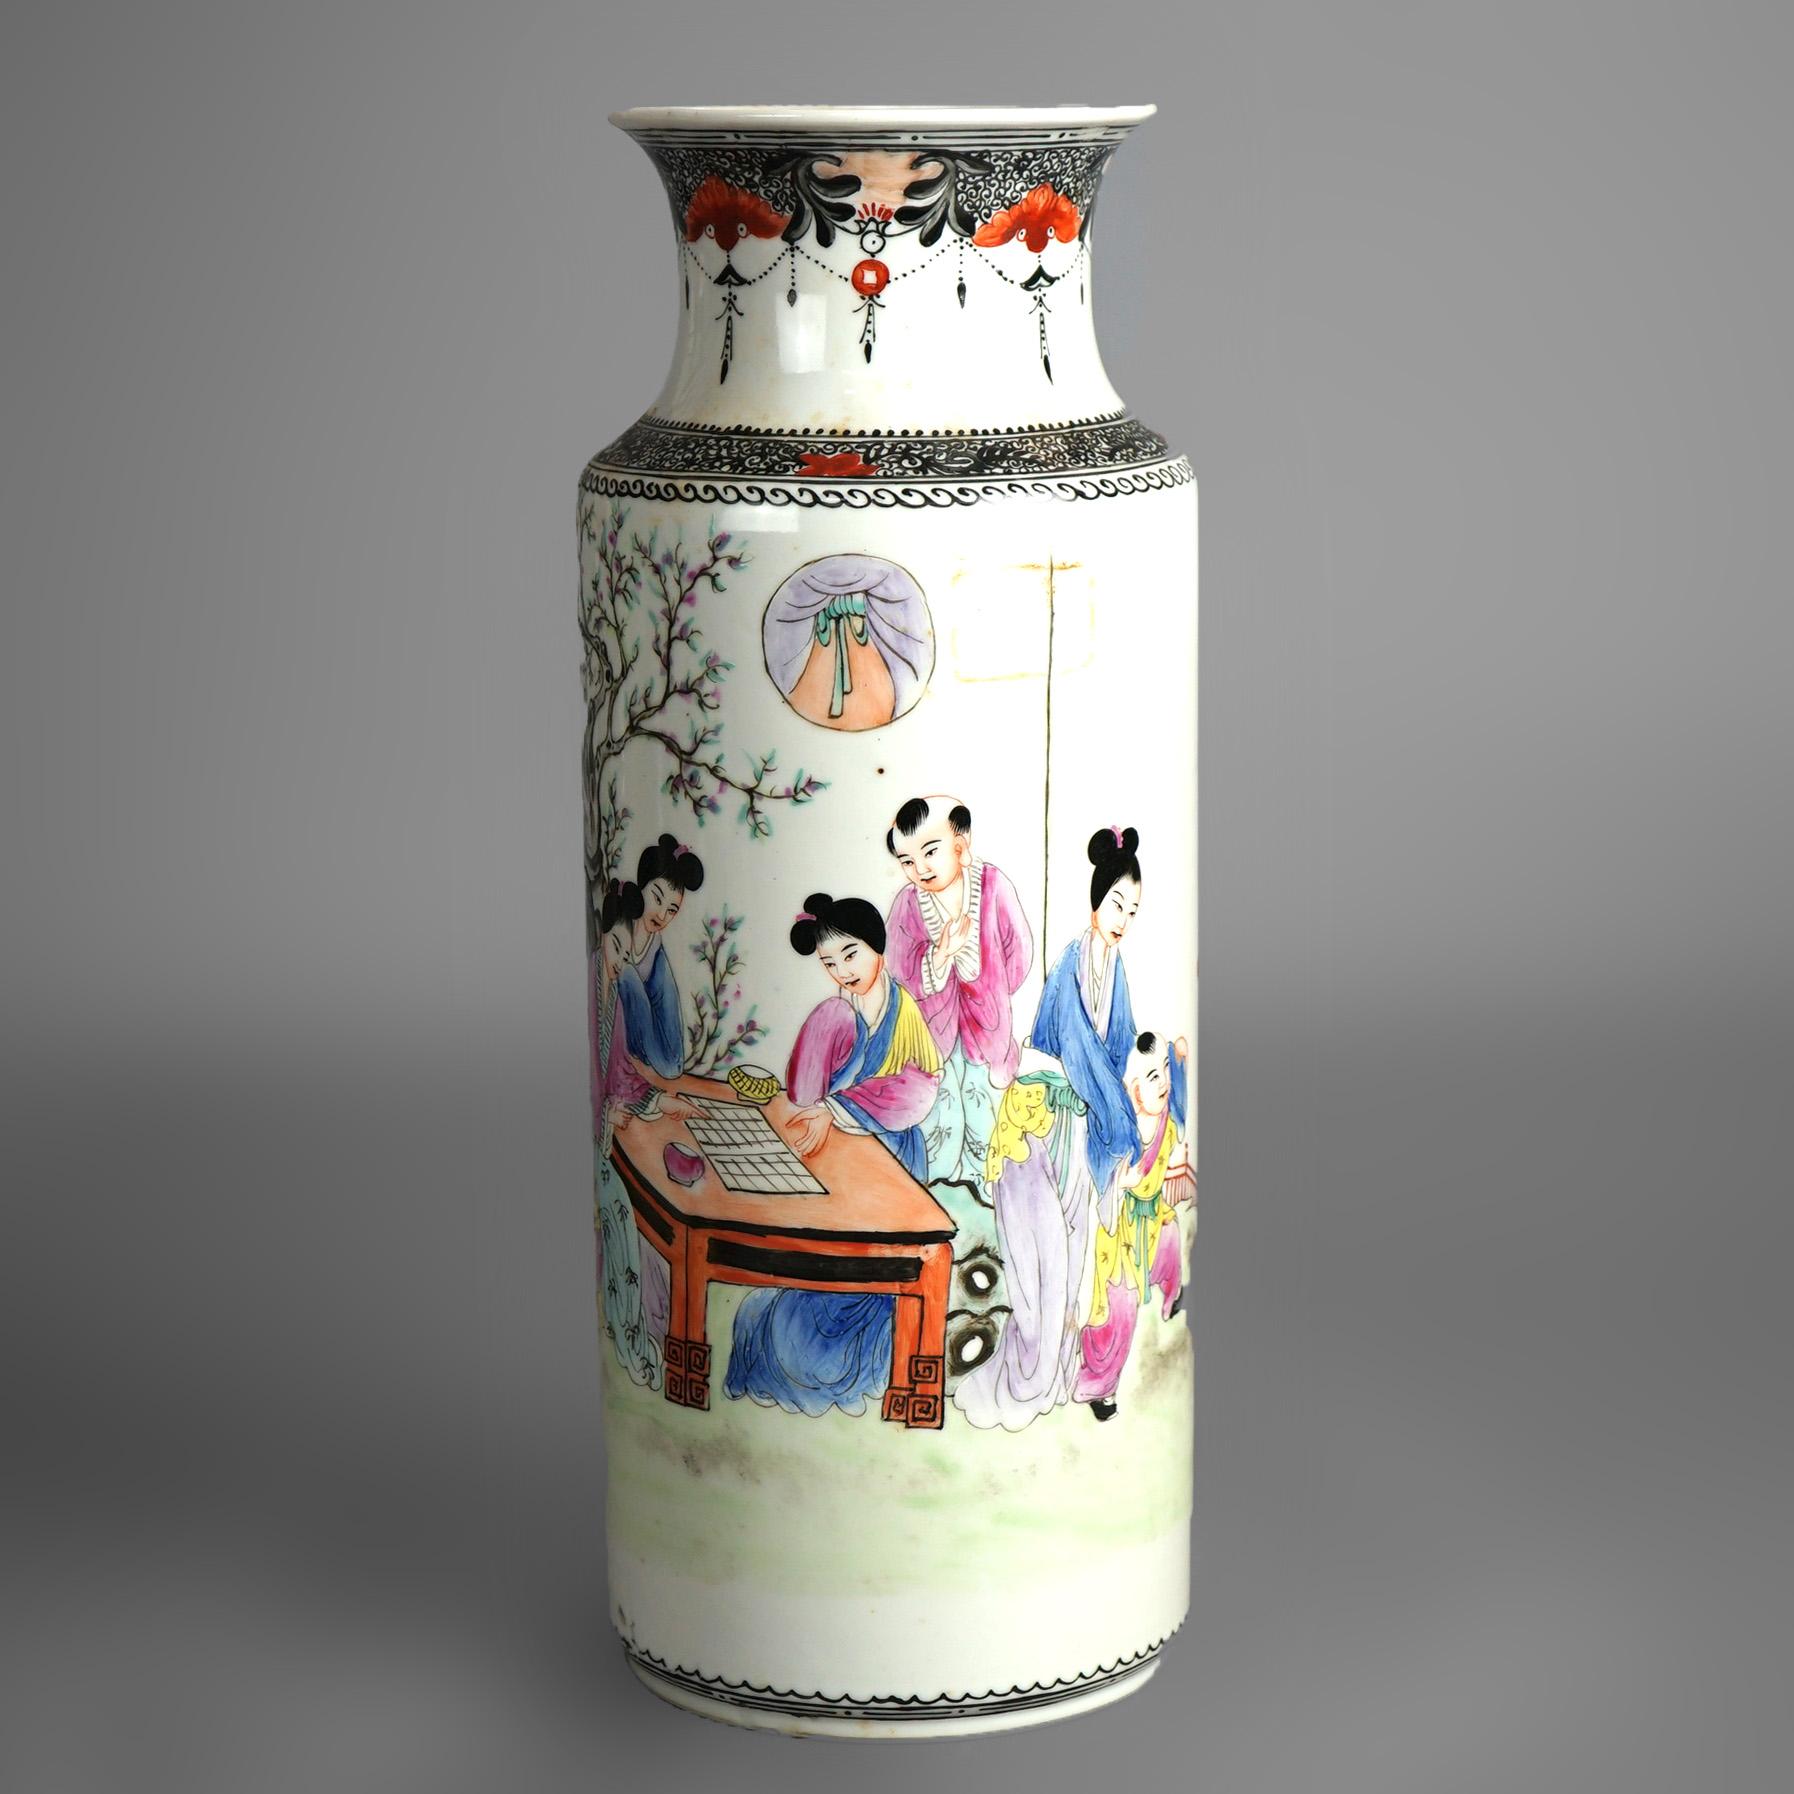 Tall Chinese Porcelain Flower Vase with Garden Genre Scene, Signed & Marked as Photographed, 20thC

Measures- 13''H x 4.75''W x 4.75''D